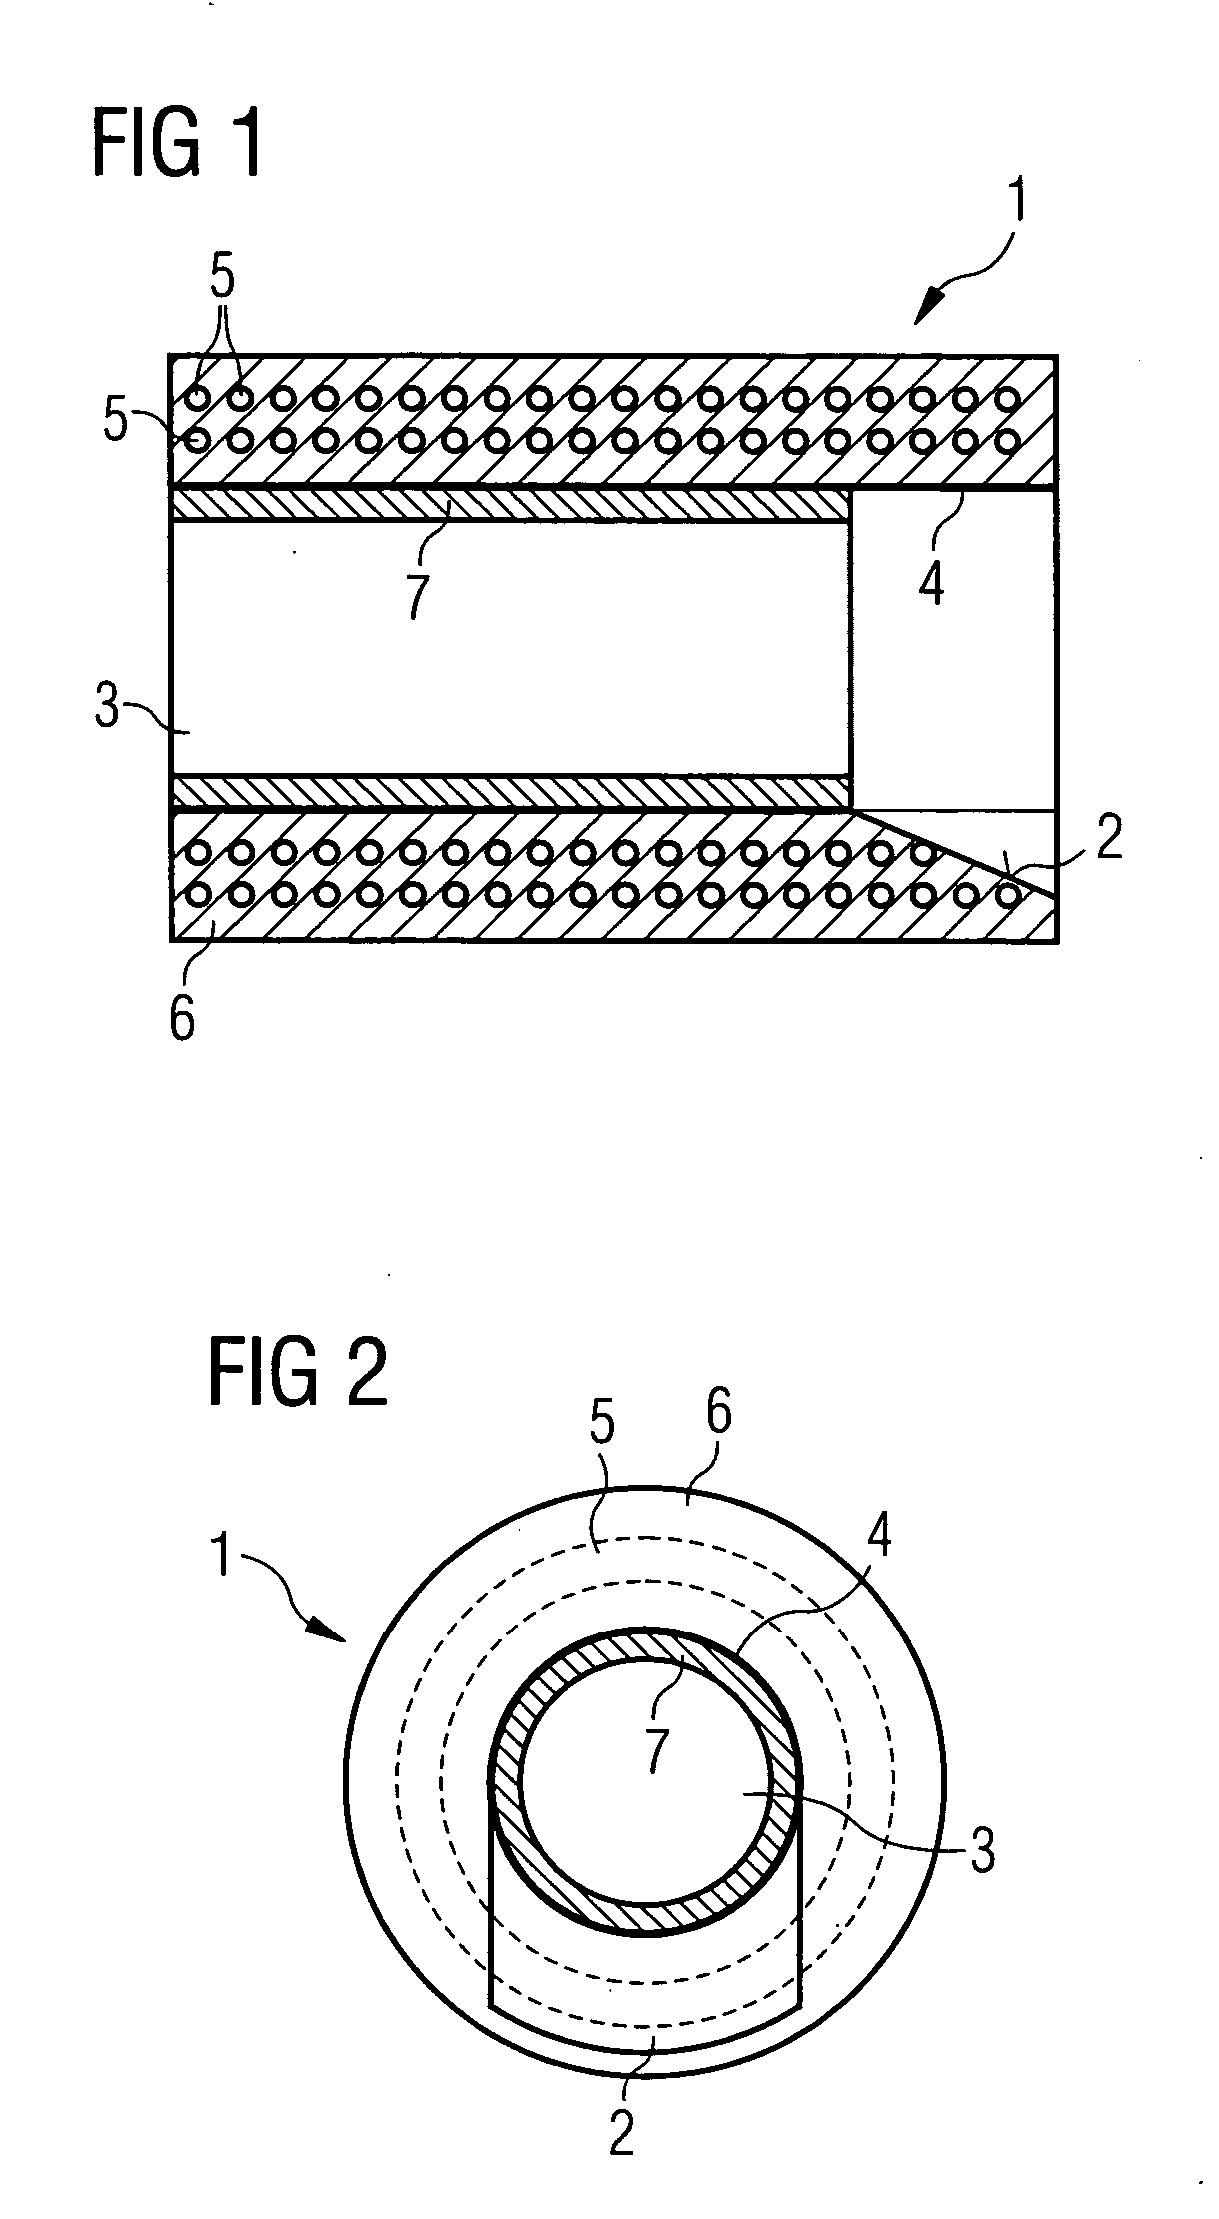 Water-soluble paramagnetic substance for reducing the relaxation time of a coolant and corresponding method